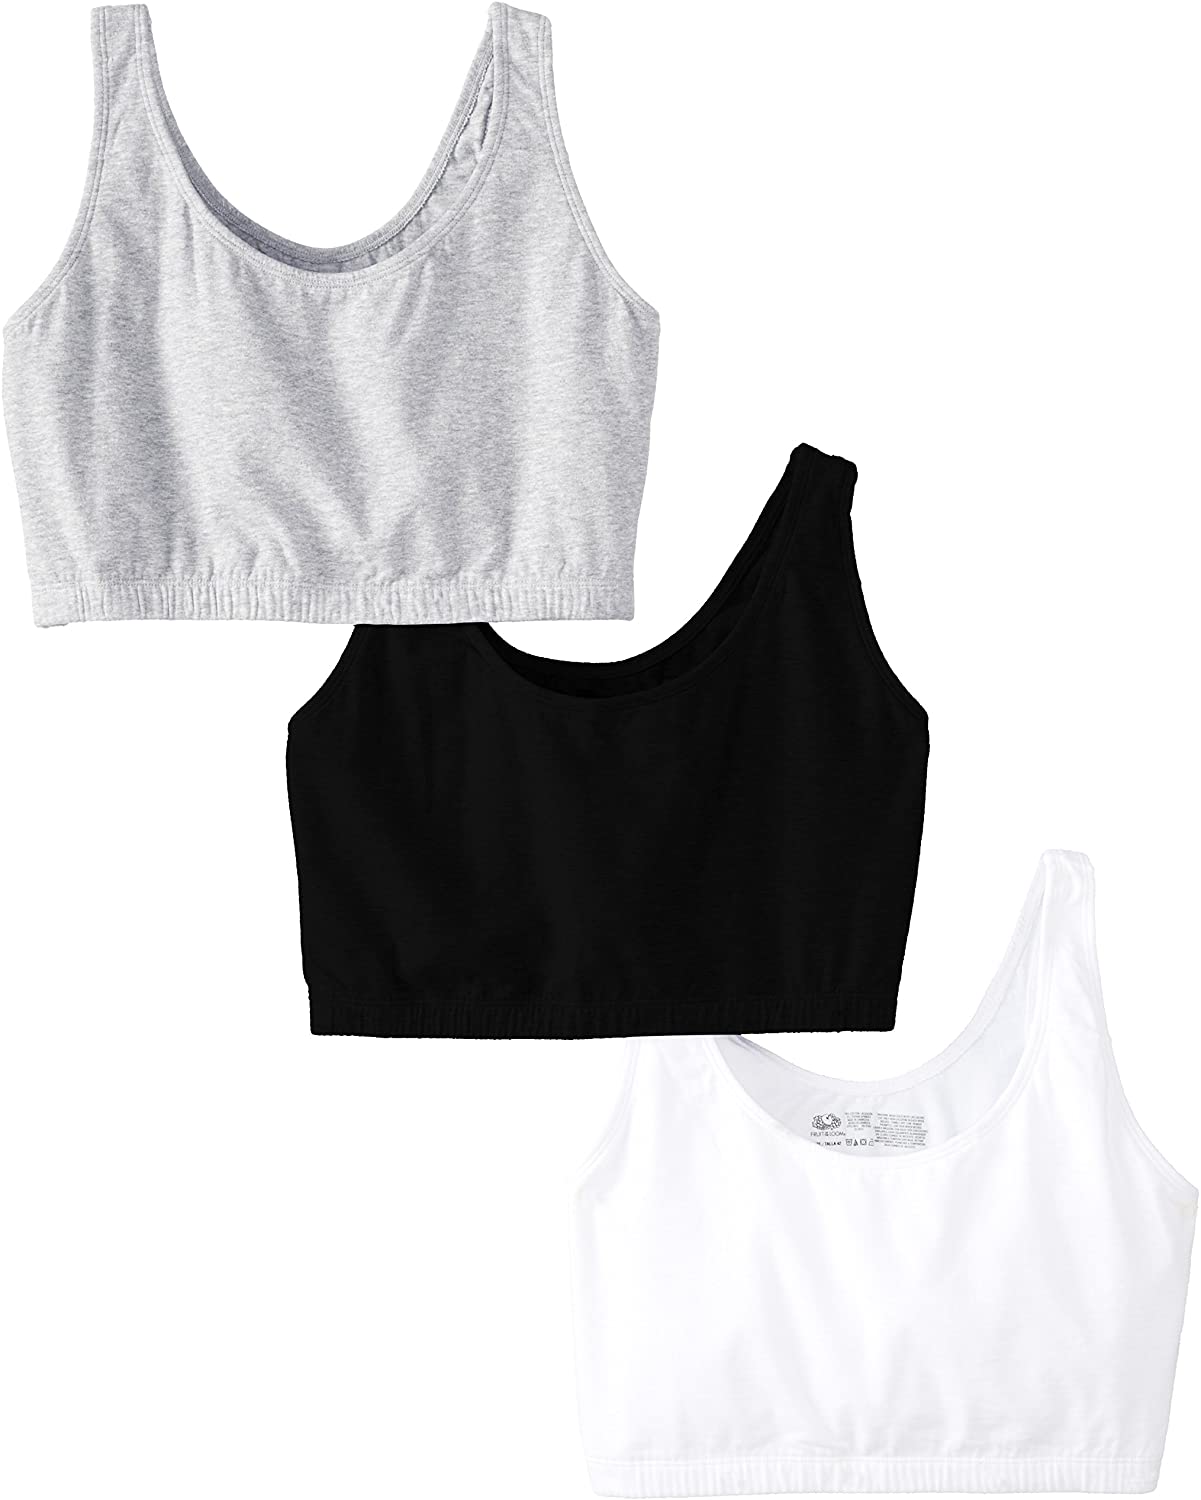 Fruit of the Loom Women's Tank Style Cotton Sports Bra 3-Pack Mint  Chip/White/Grey Heather 40